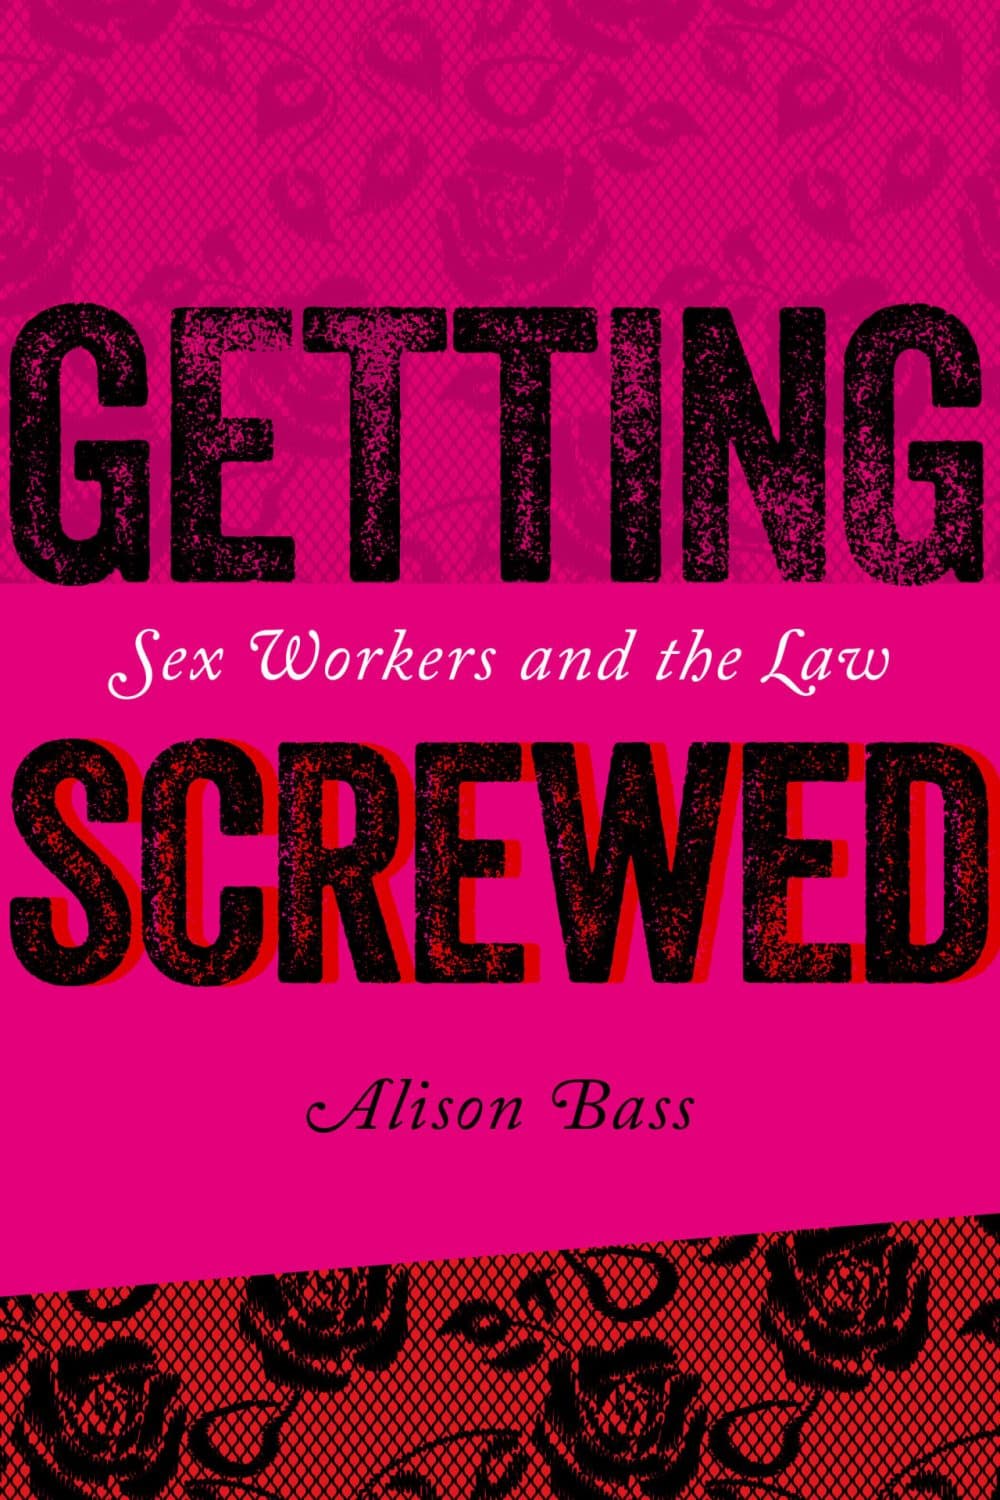 &quot;Getting Screwed: Sex Workers and the Law&quot; by Alison Bass. (Courtesy of Alison Bass)